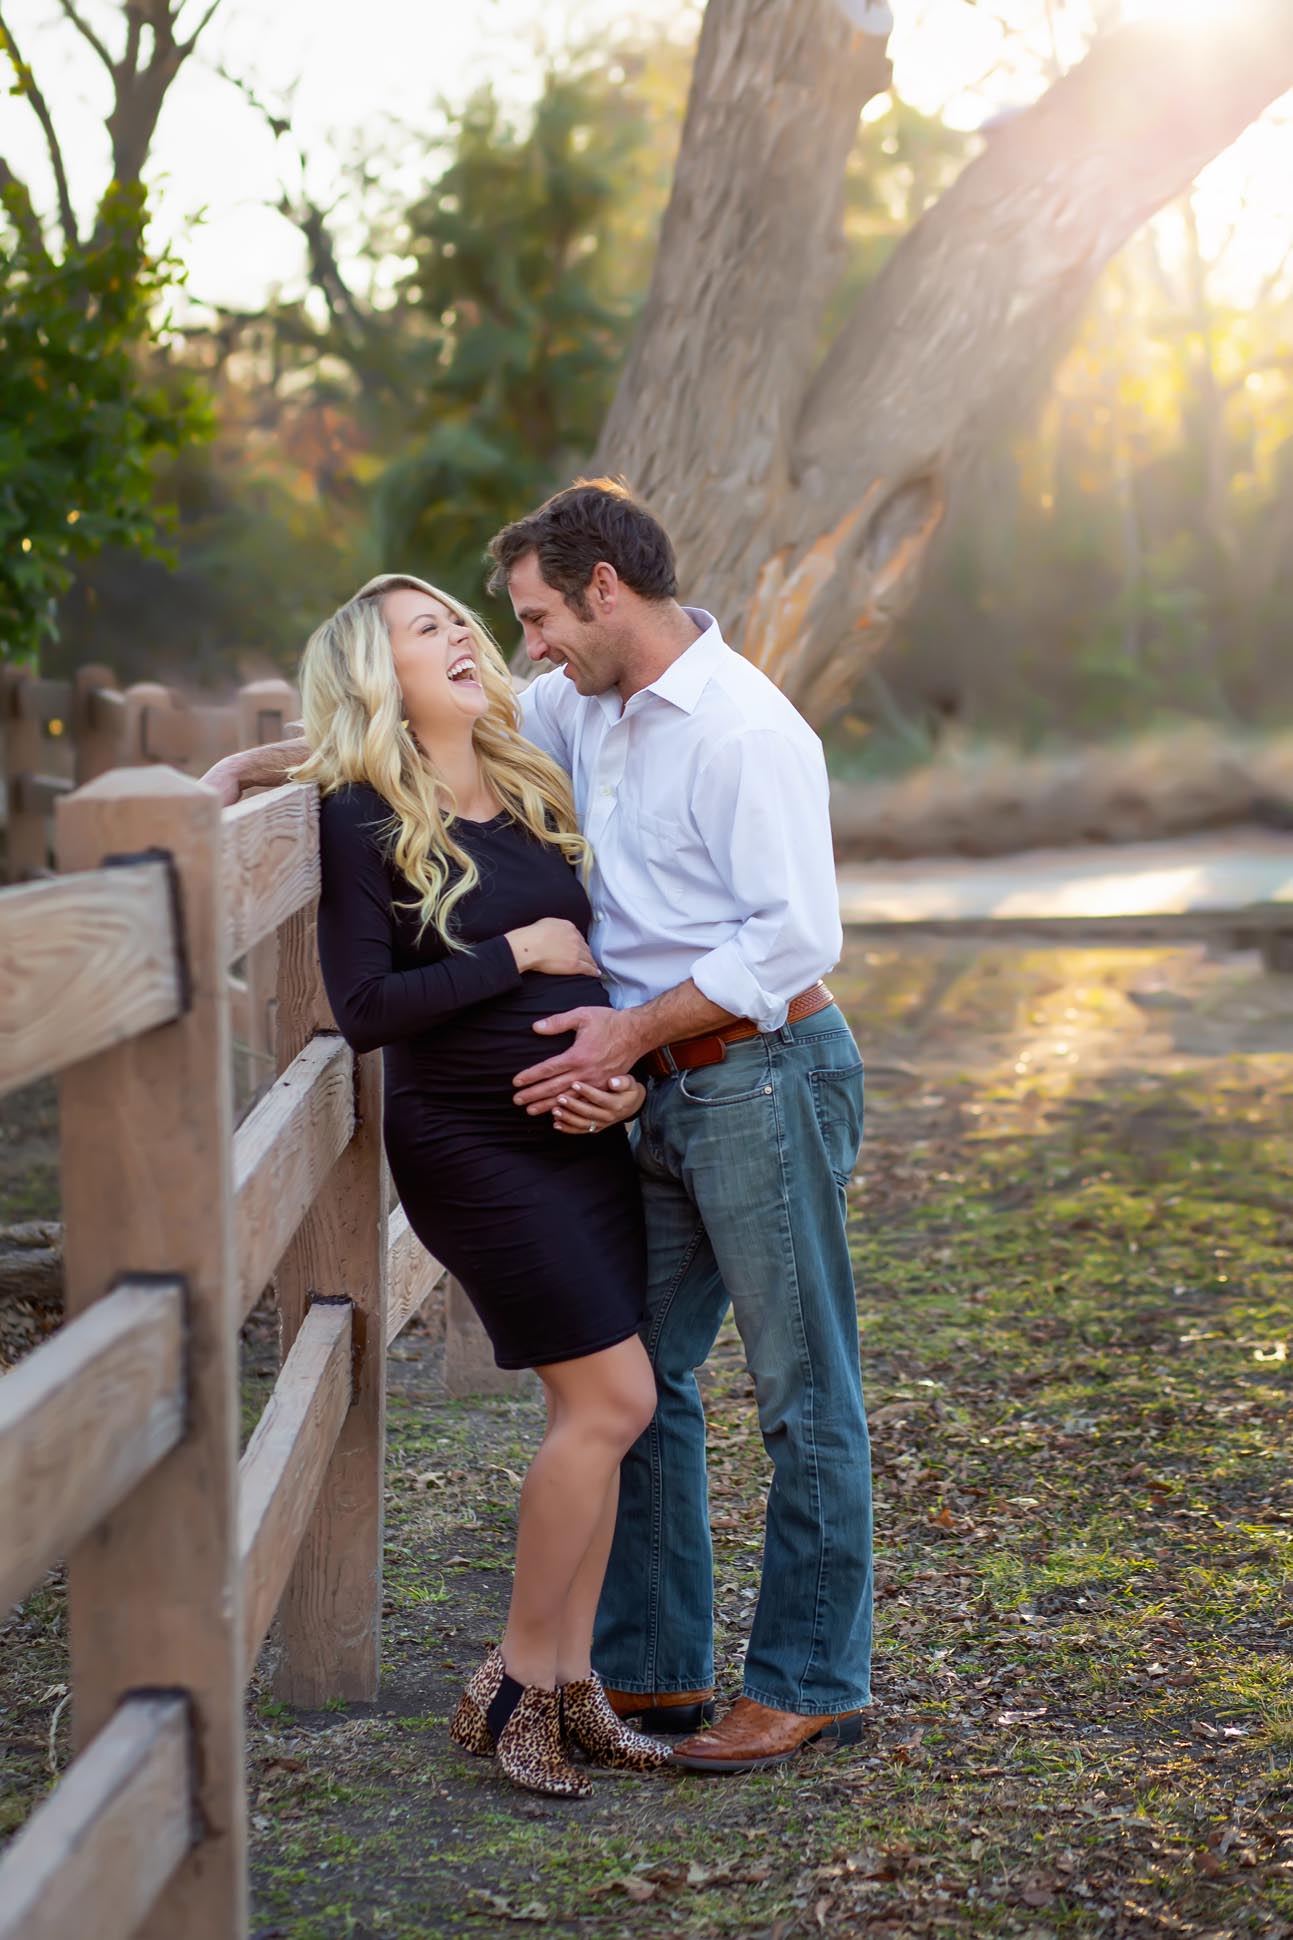 Dallas maternity photographer shares picture of couple expecting baby next to western fence at Prairie Creek Park in Richardson Texas, mom to be is wearing short black dress, dad is in jeans and white button down shirt